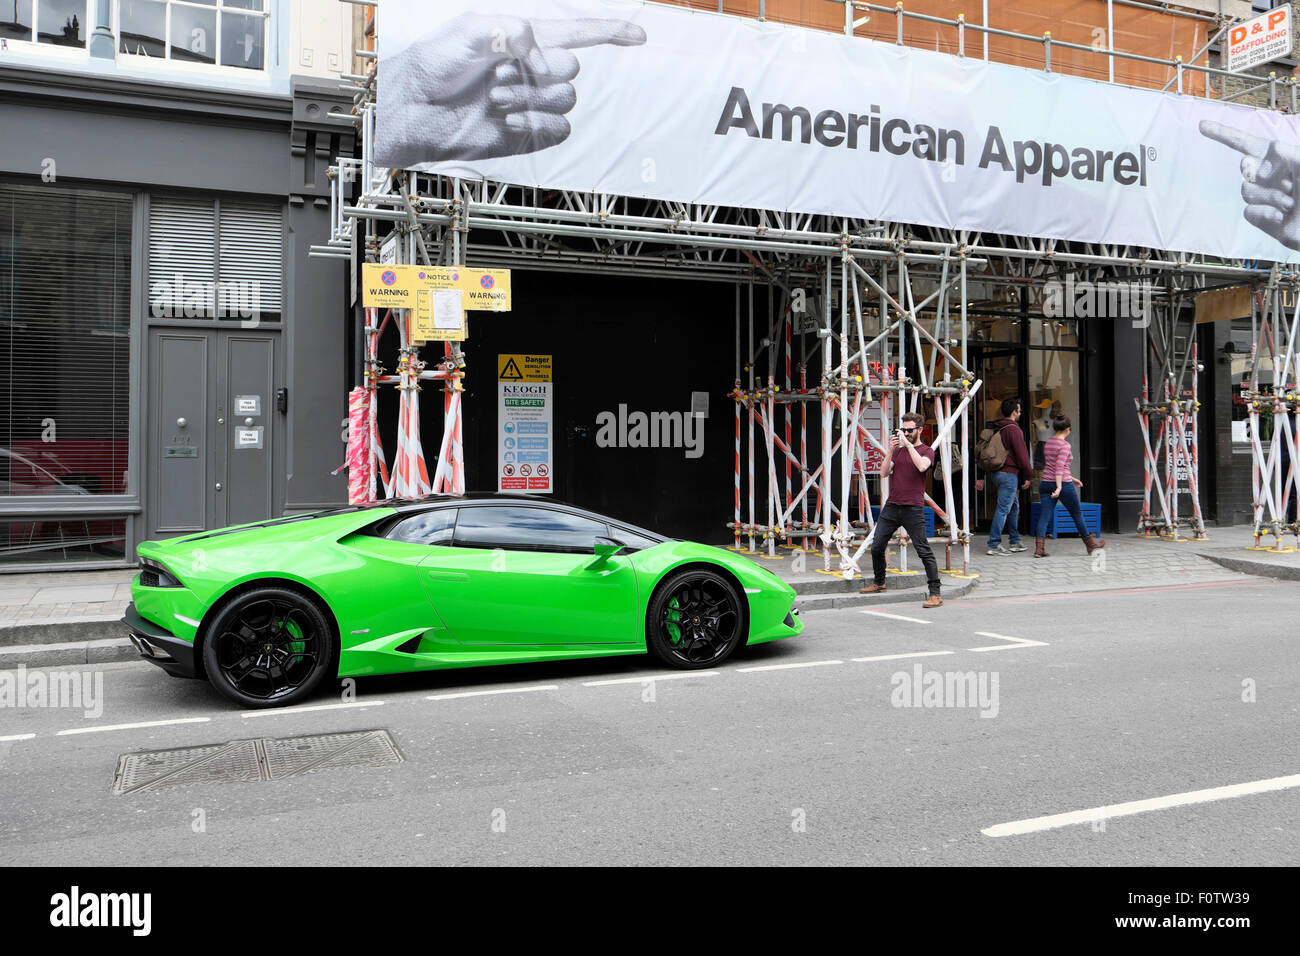 Man photographing green Lamborghini parked outside American Apparel shop in Shoreditch East London, UK   KATHY DEWITT Stock Photo